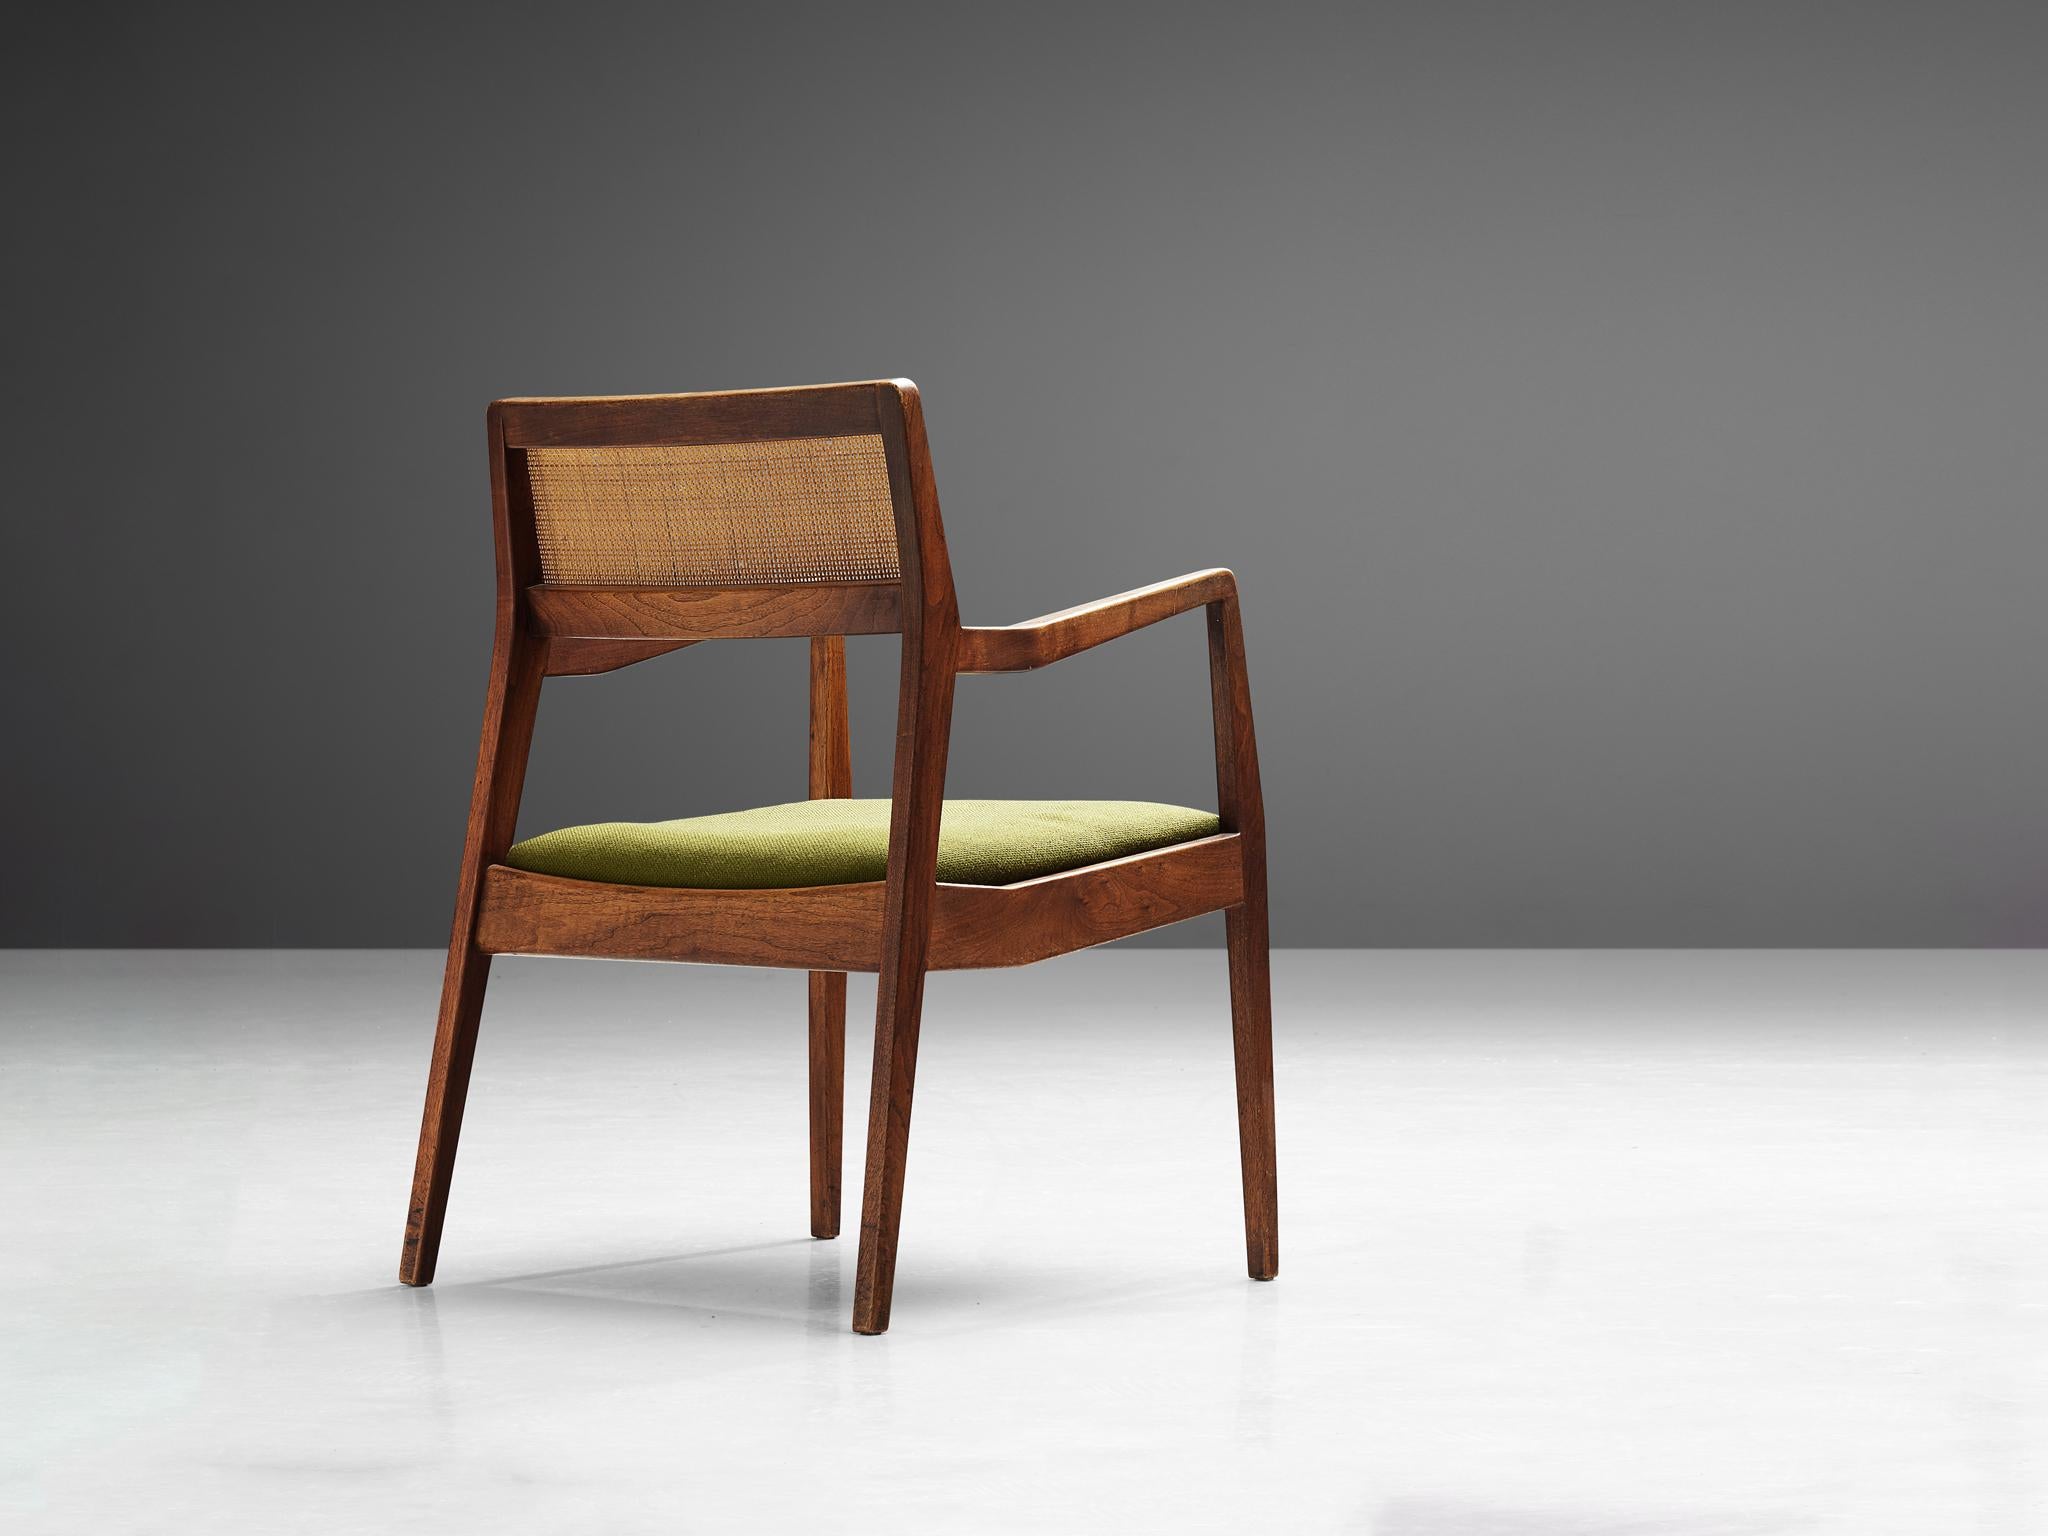 Jens Risom, 'Playboy' dining chair, cane, fabric, walnut, United States, design 1958, production 1960s.

This Classic 